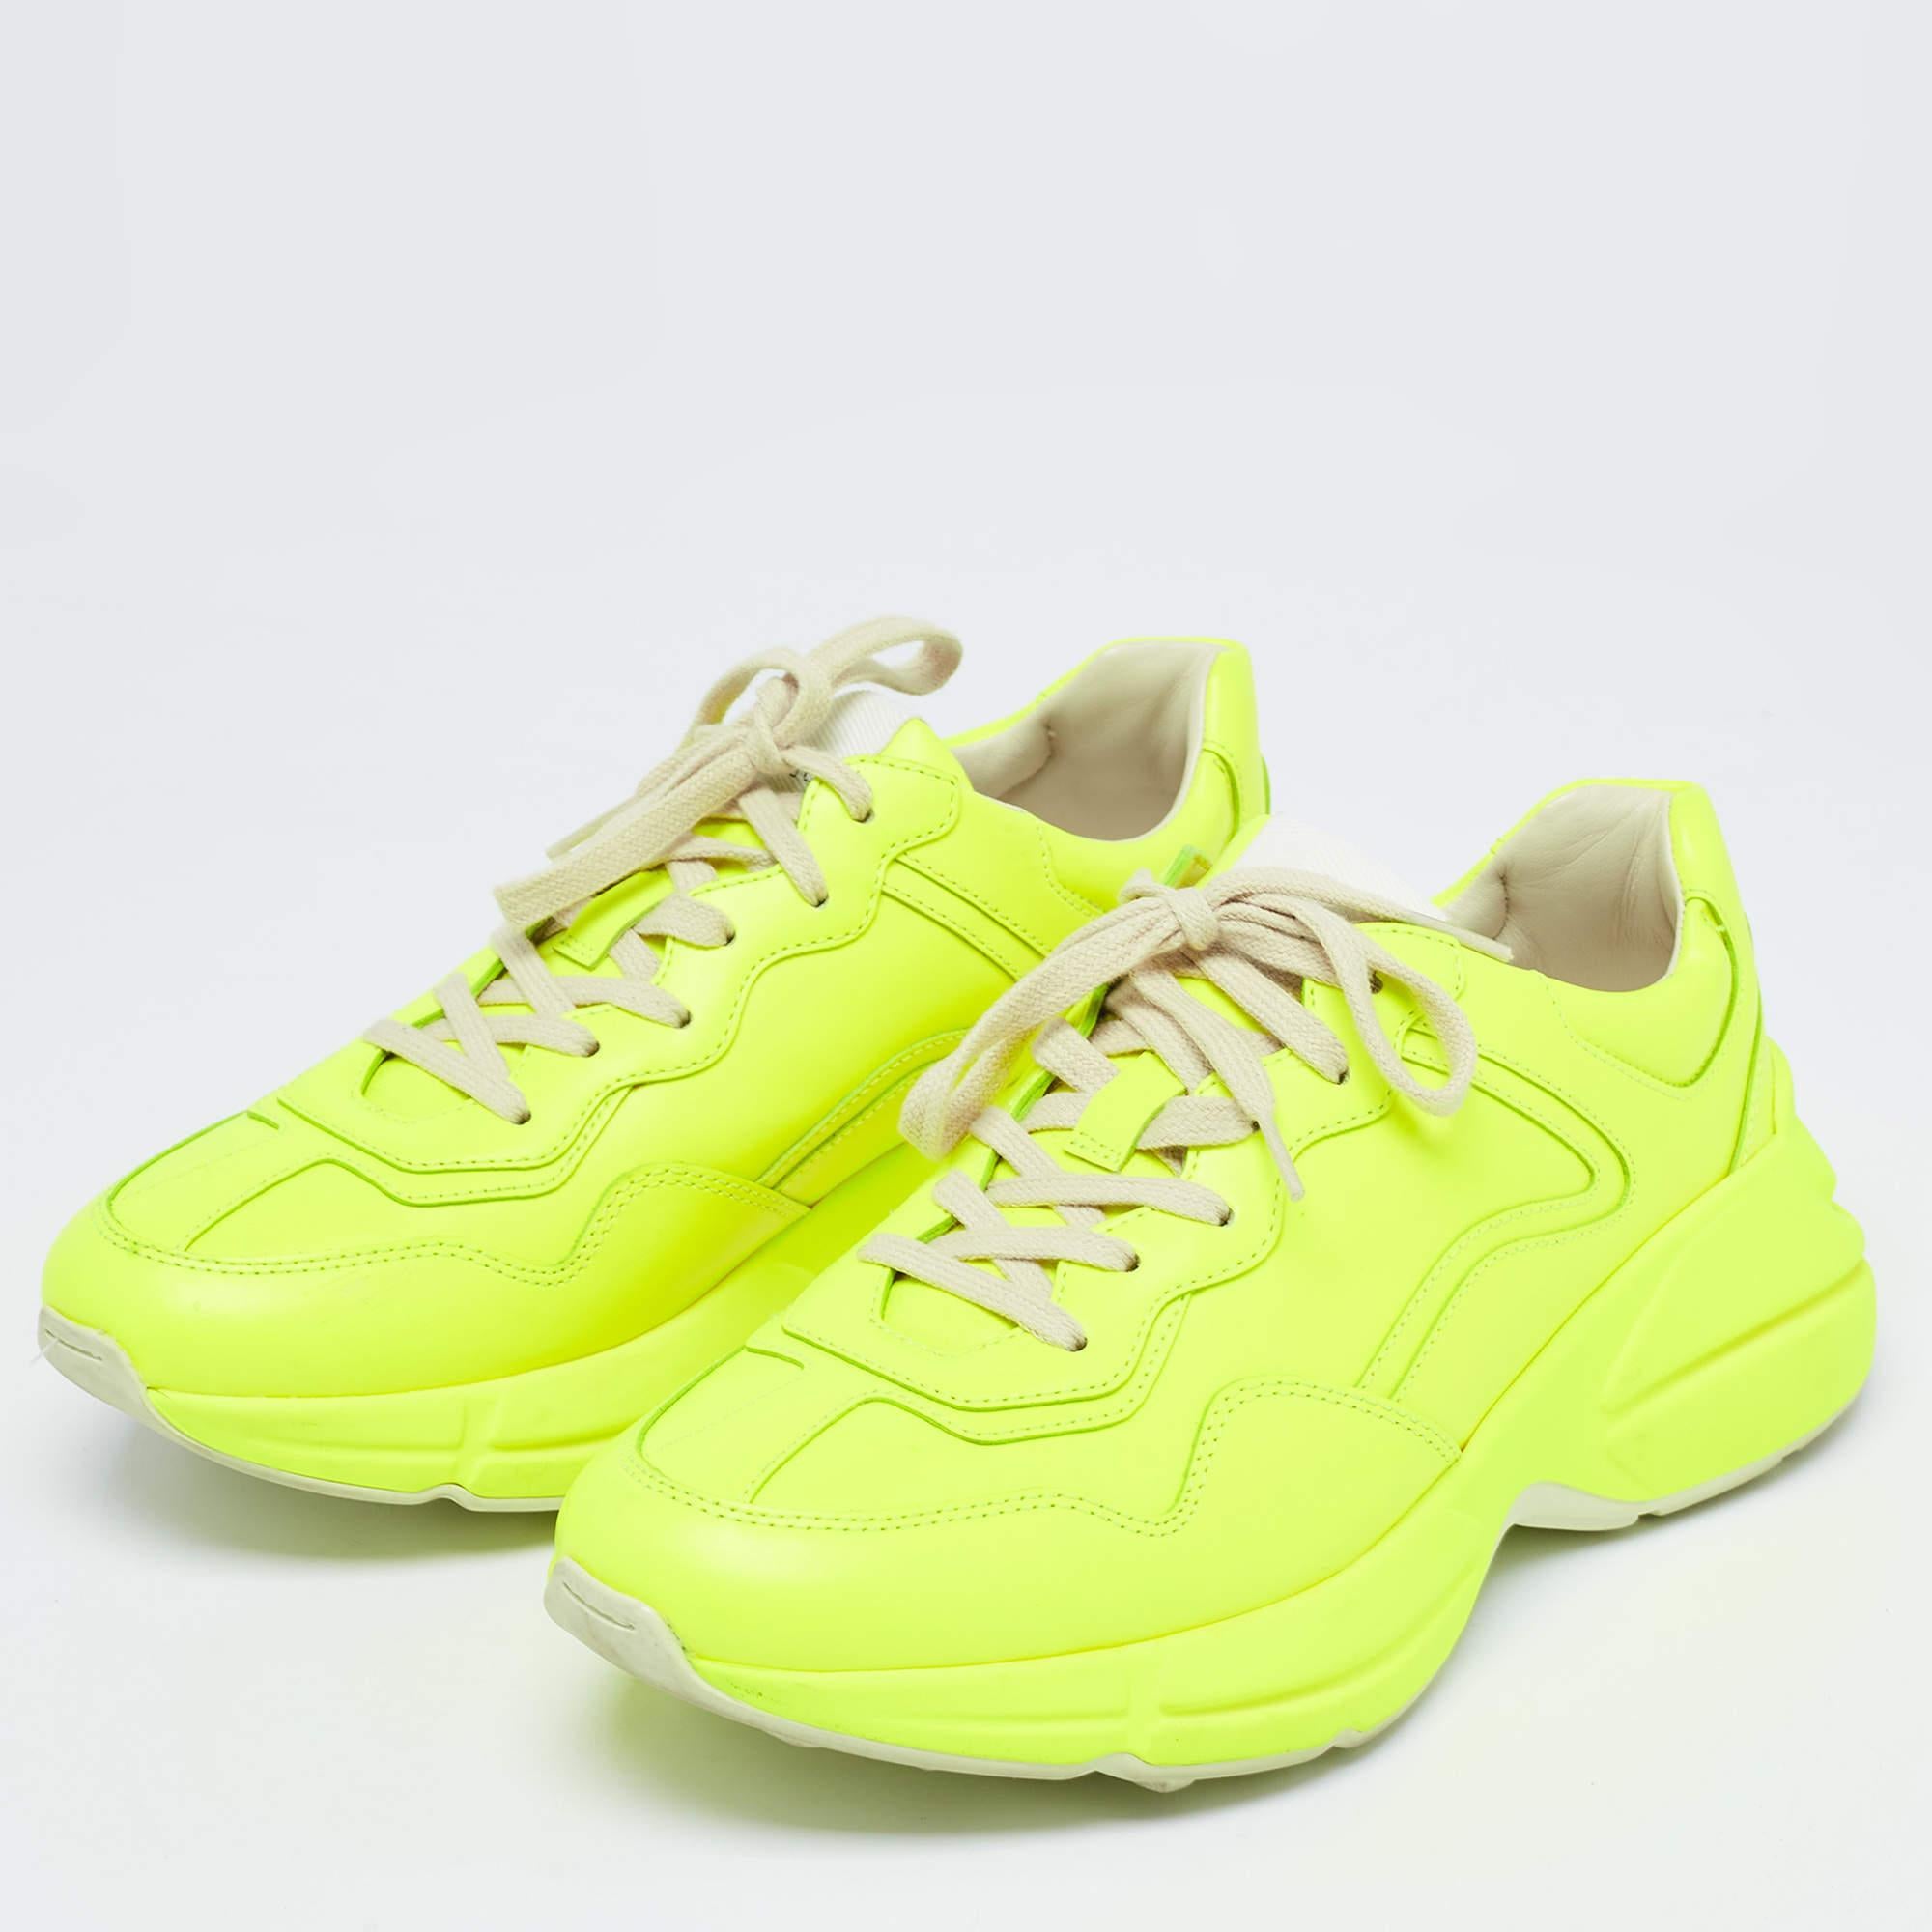 Women's Gucci Neon Yellow Leather Rhyton Sneakers Size 39 For Sale